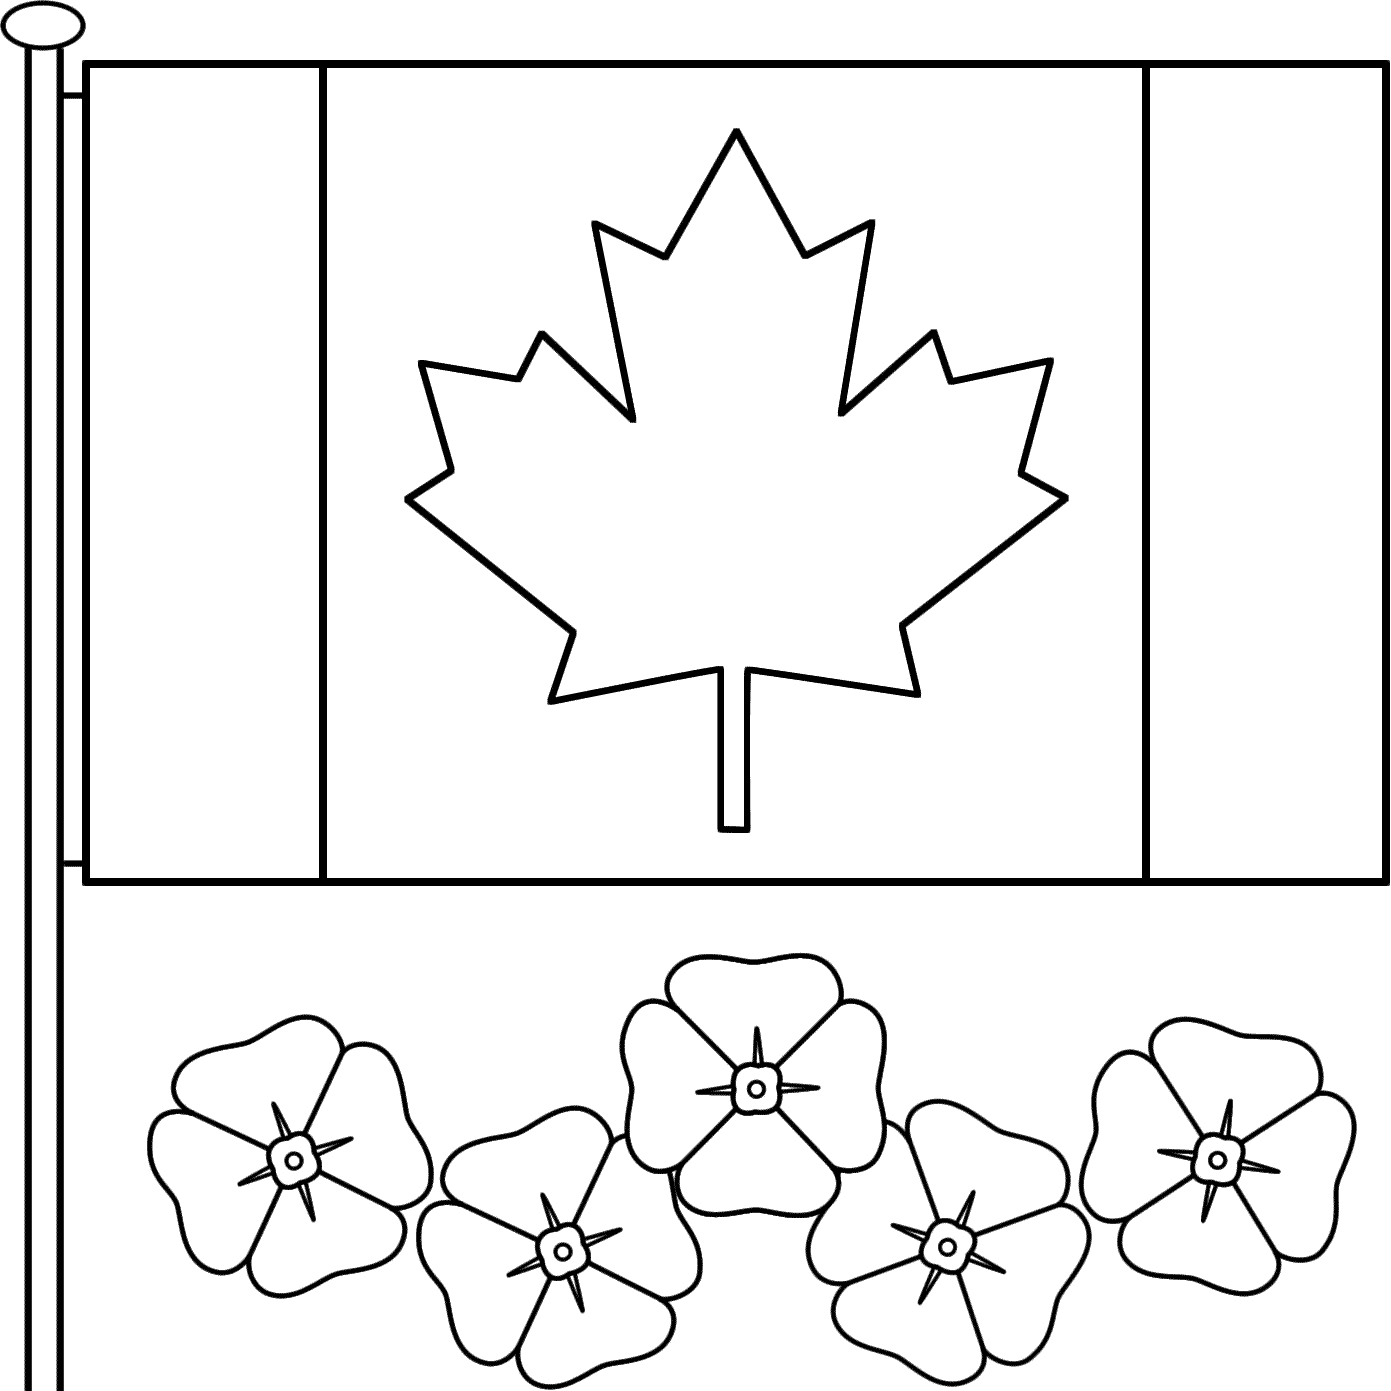 canadian-flag-with-poppies-coloring-page-remembrance-day-coloring